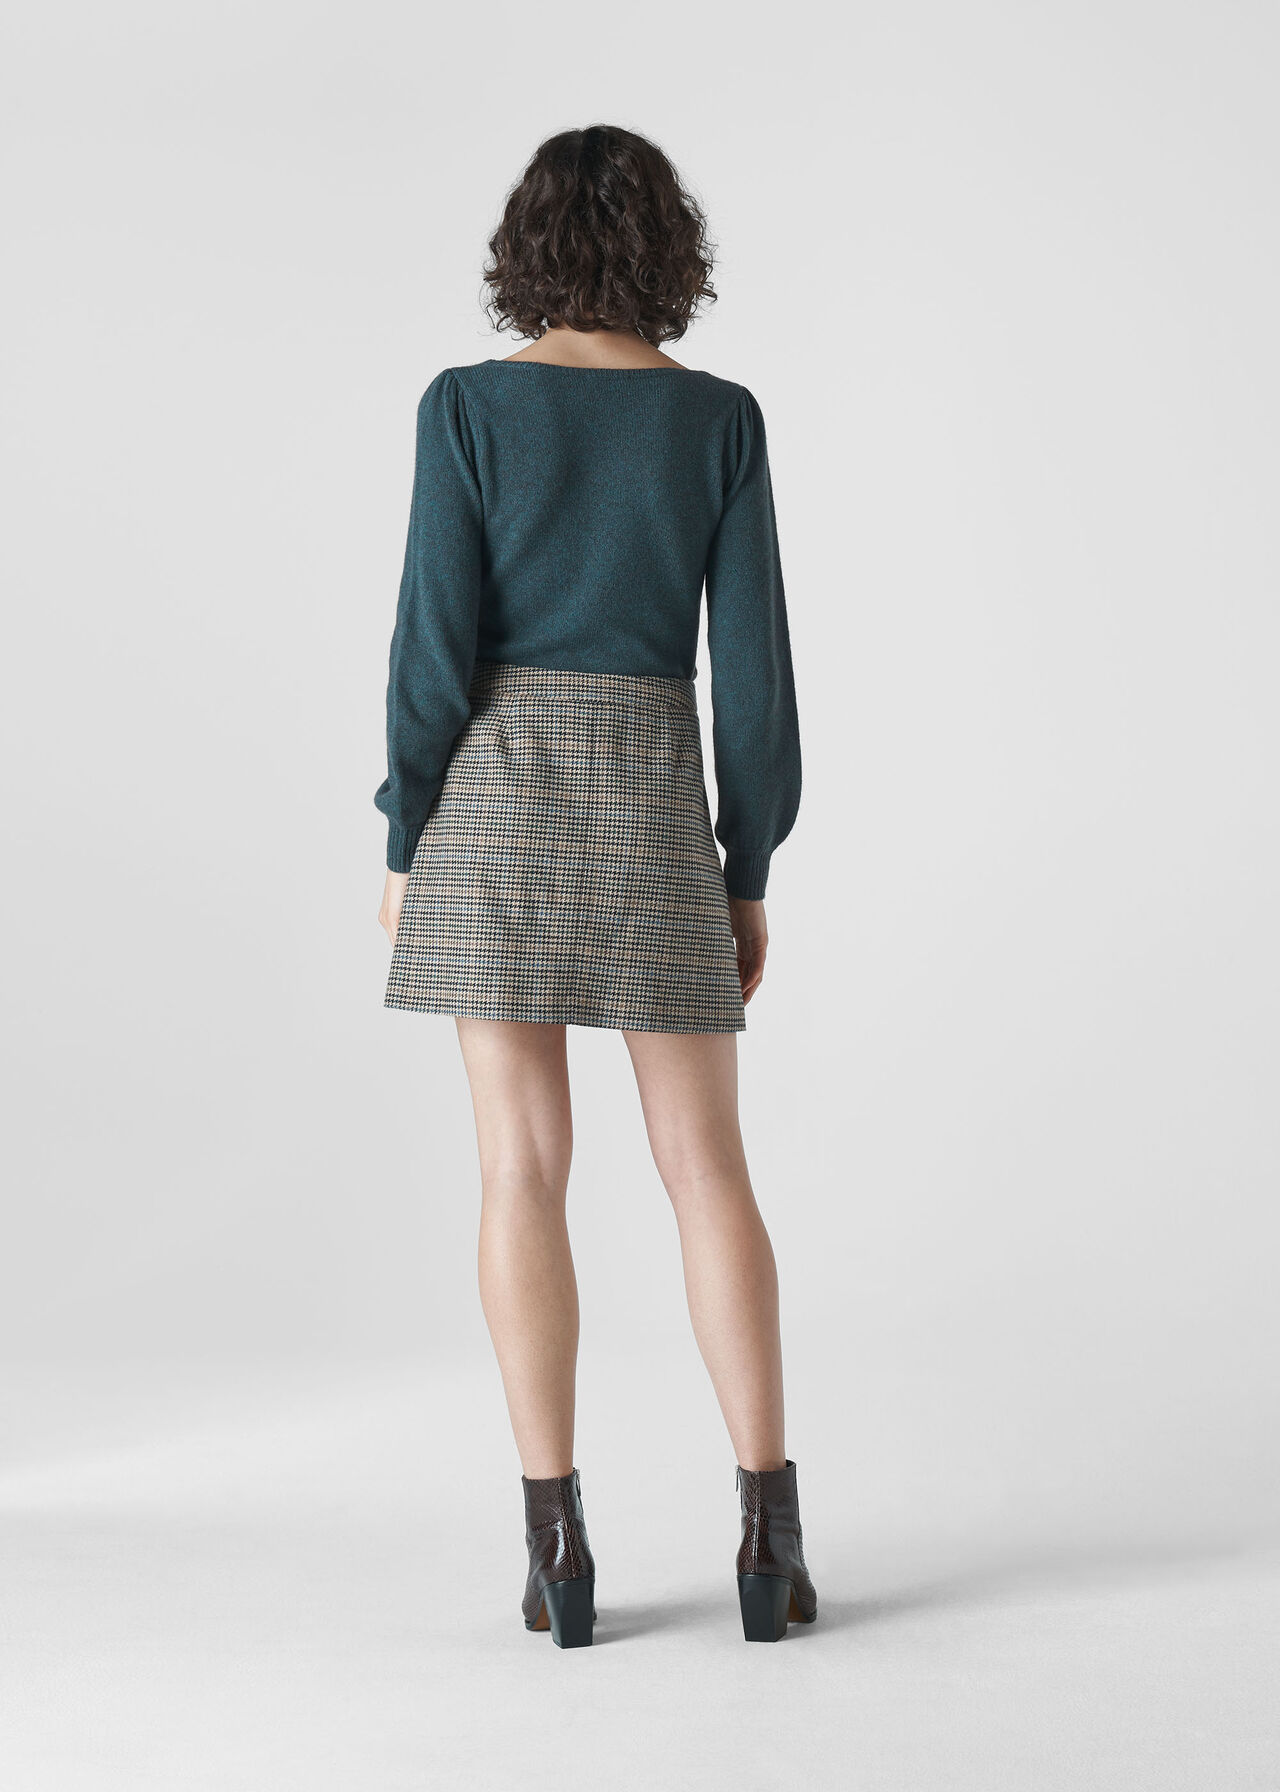 Square Neck Yak Mix Knit Teal